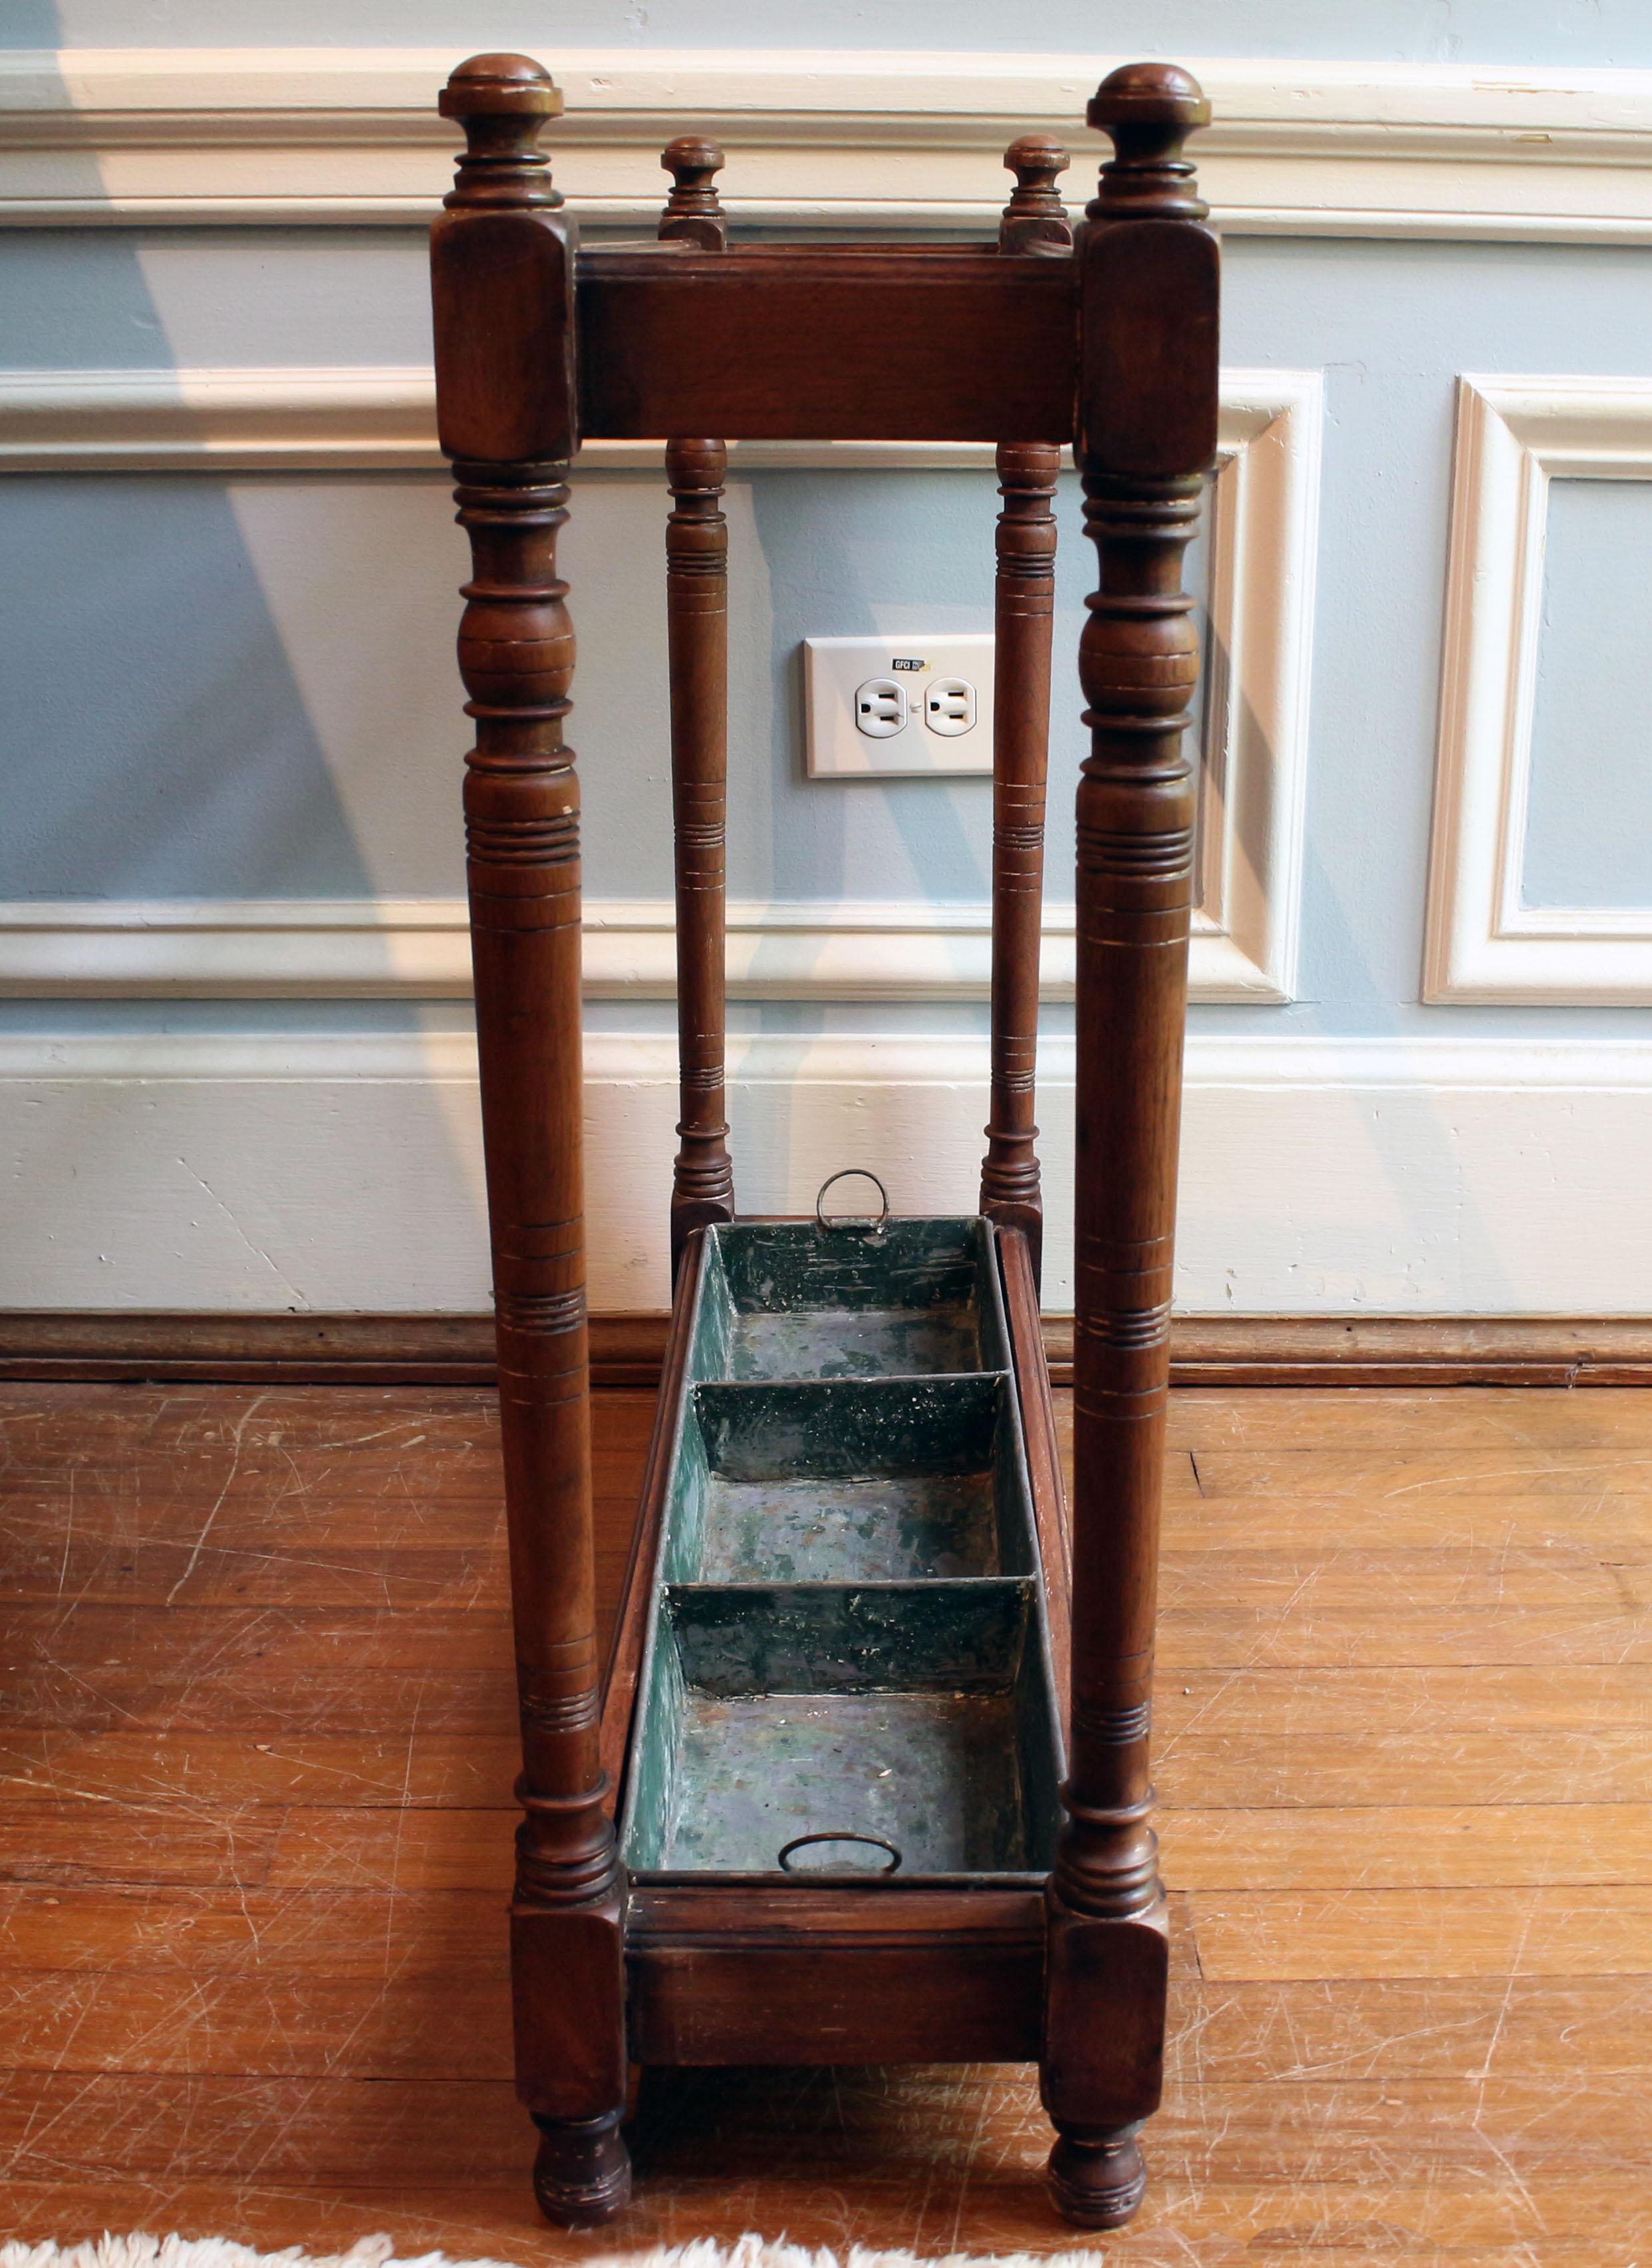 circa 1860s, Turned wood stick stand with drip tray. Wood with compartmented metal drip tray. Flattened ball finials atop columnar form ring carved uprights; molded rails. Expected wear given age & use in an English Country House, some old plaster &